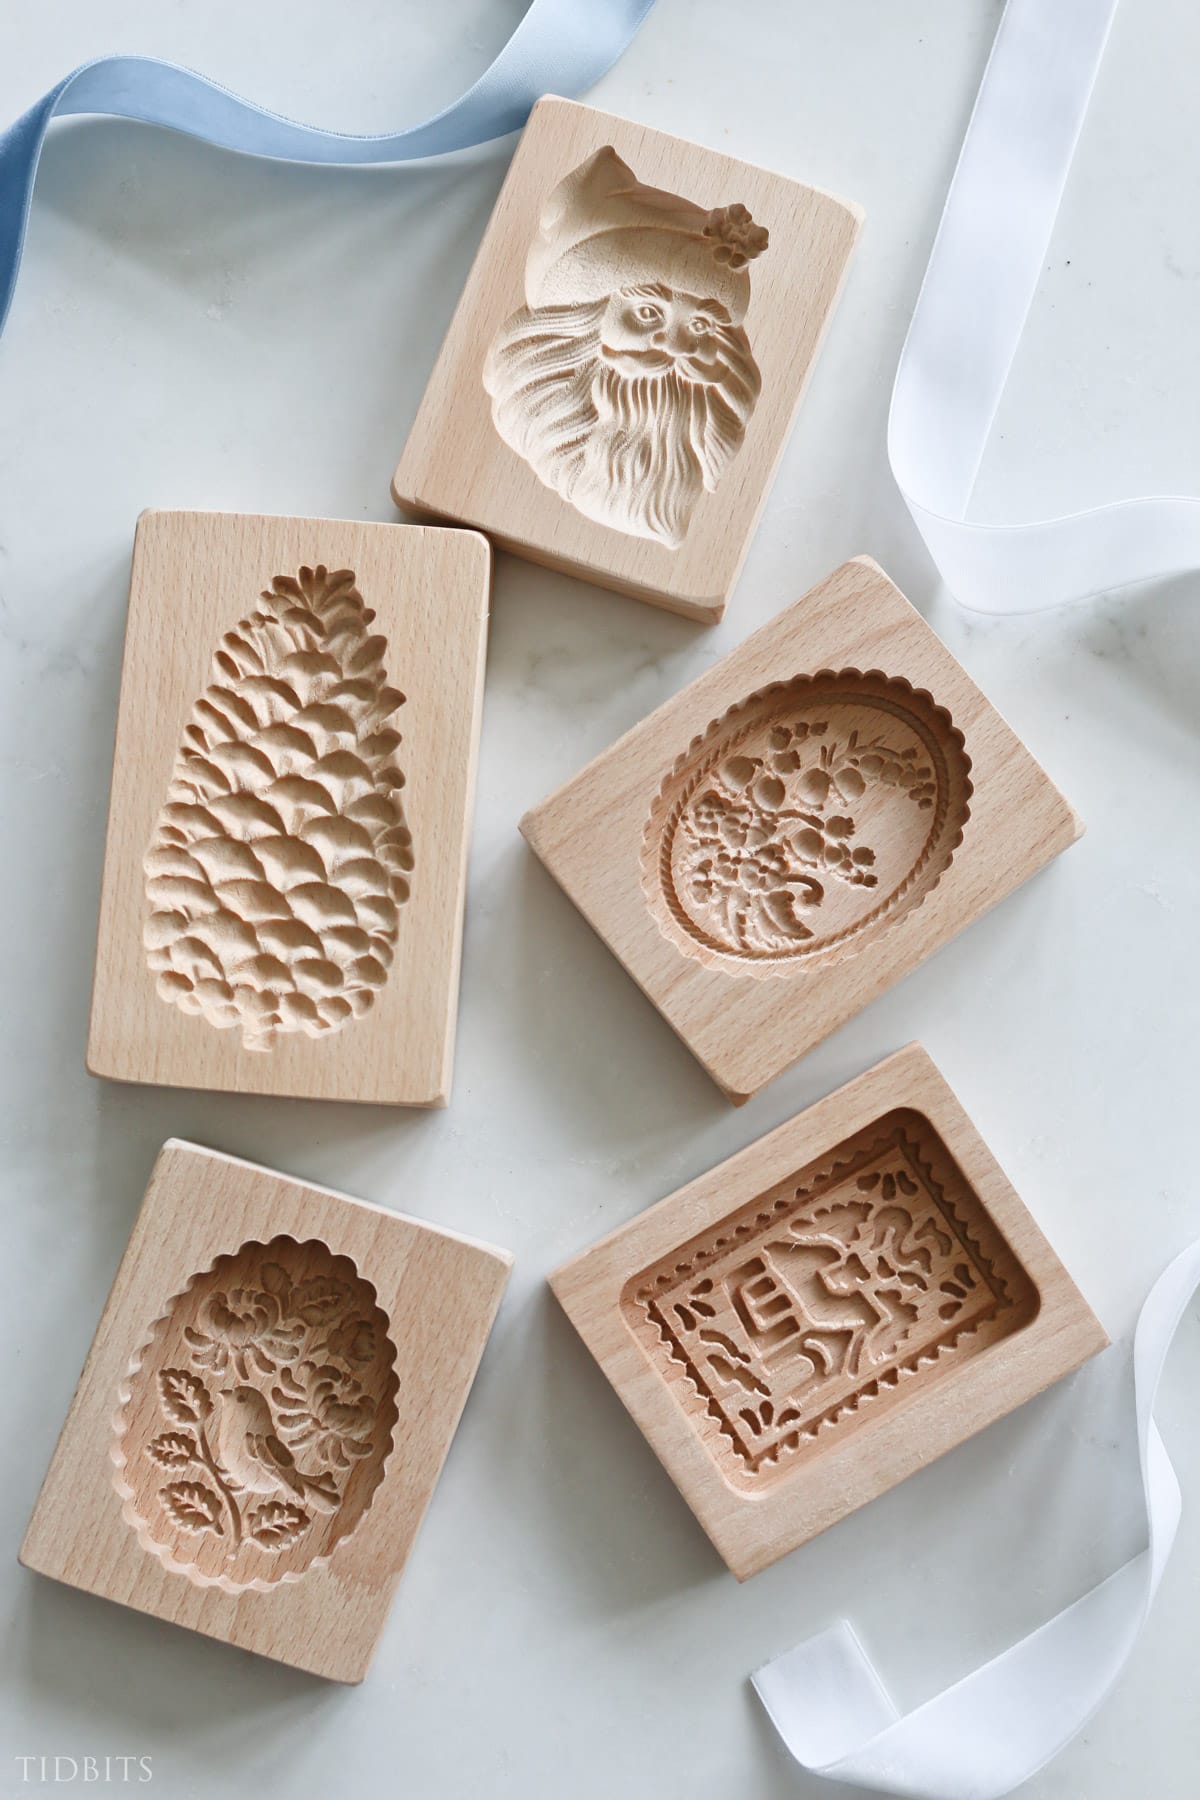 wooden cookie molds to make air dry clay ornaments